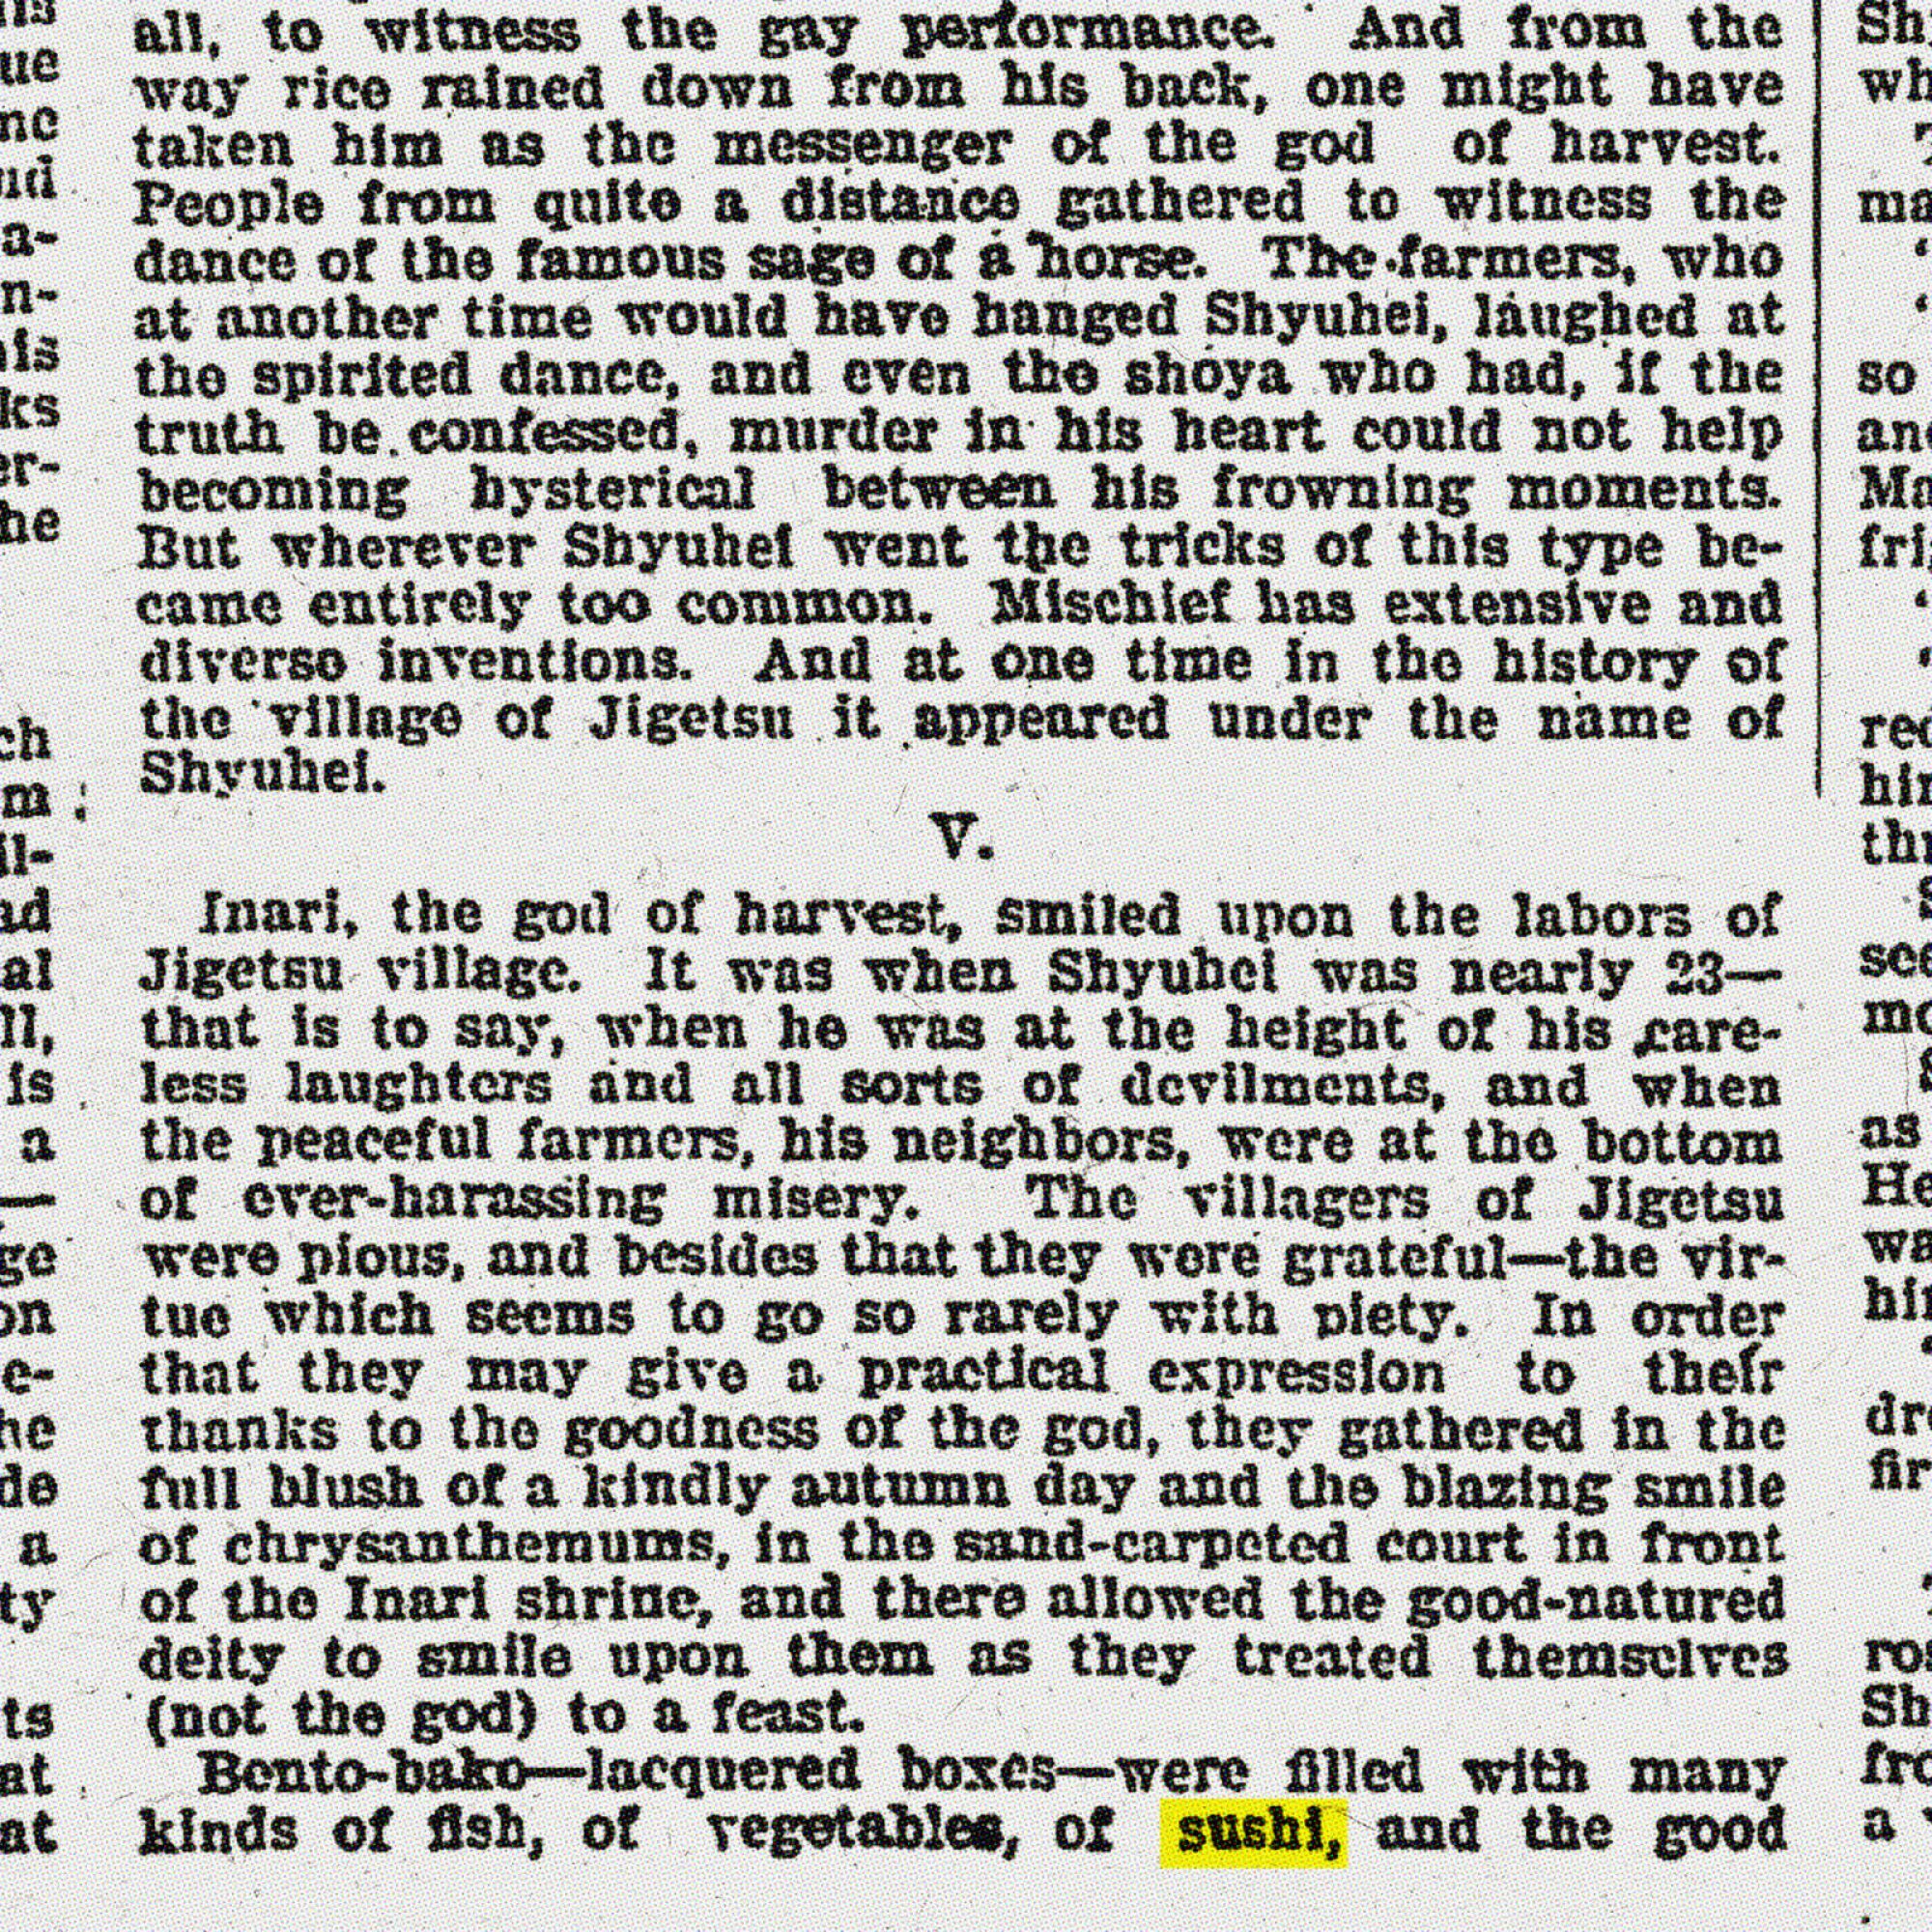 Sushi was first mentioned by The Times in an 1899 article.